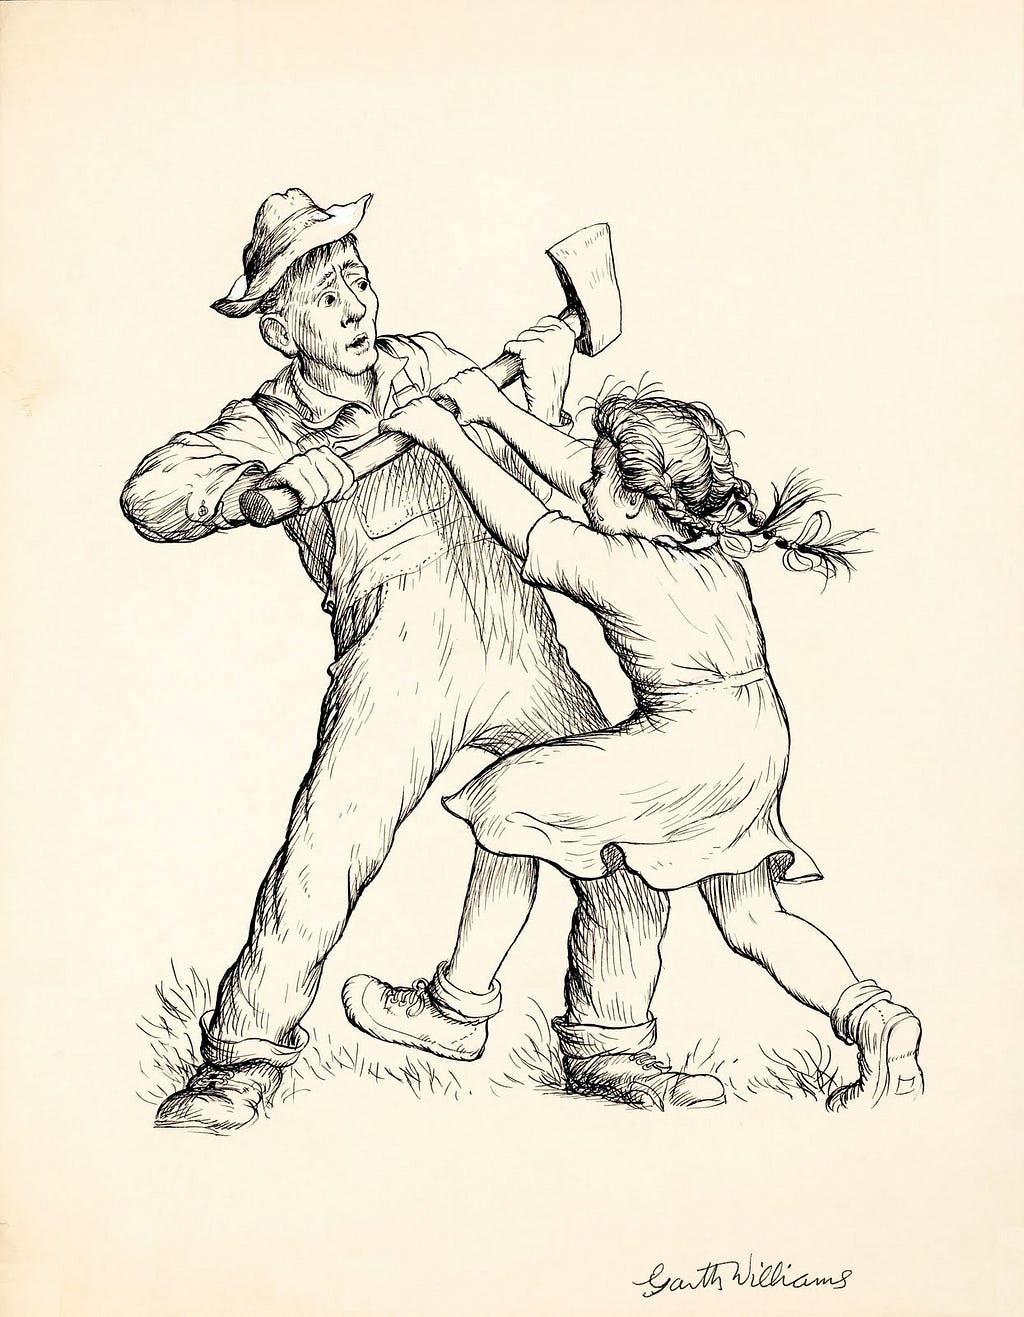 Dont Kill Wilbur! John Arable fights with his daughter Fern over an axe as he intends to kill the runt Wilbur.